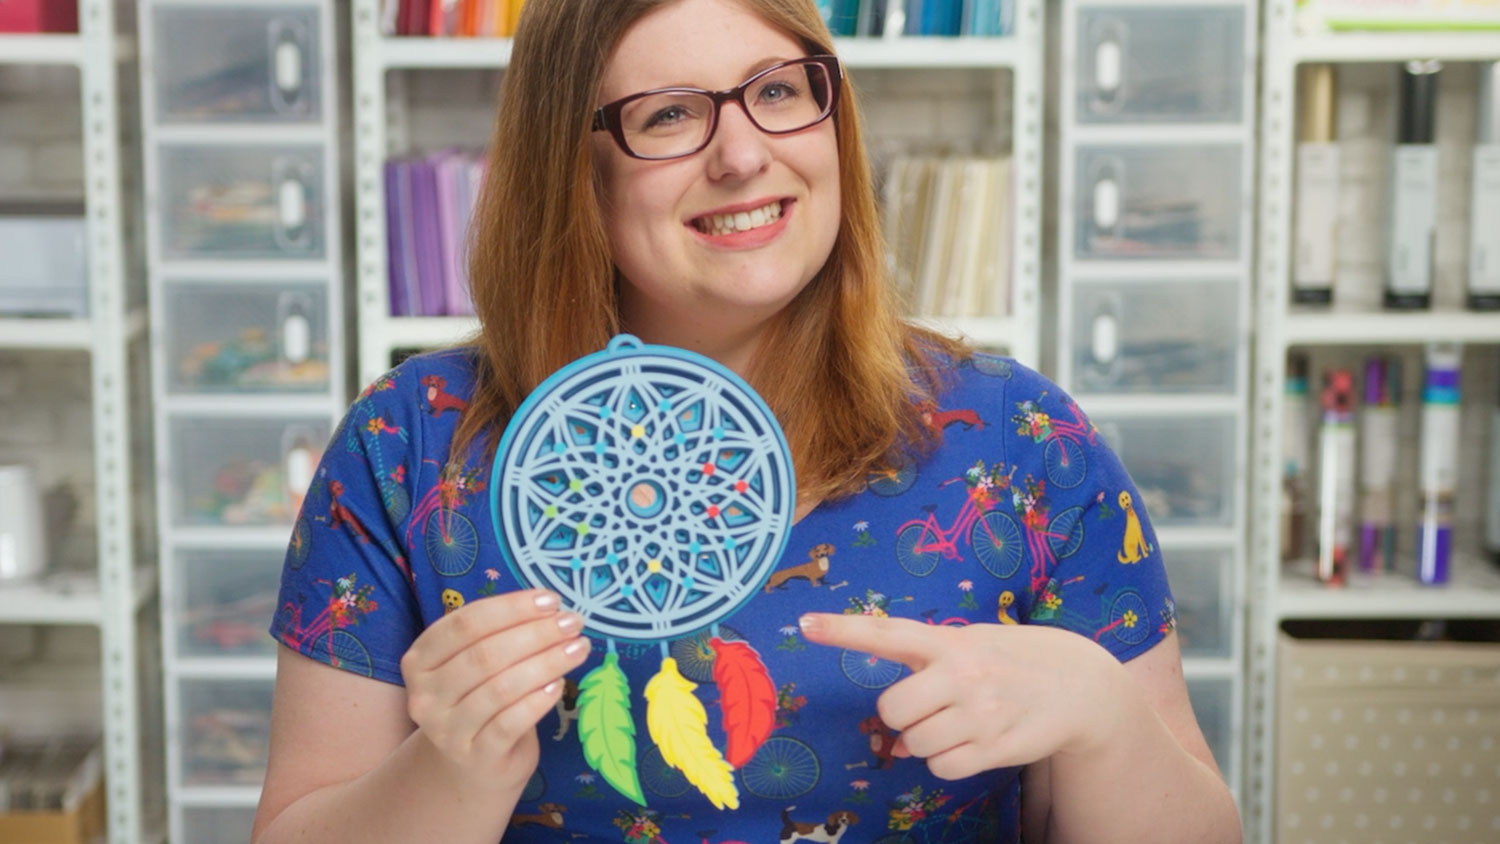 How to Make a Dreamcatcher with a Cricut